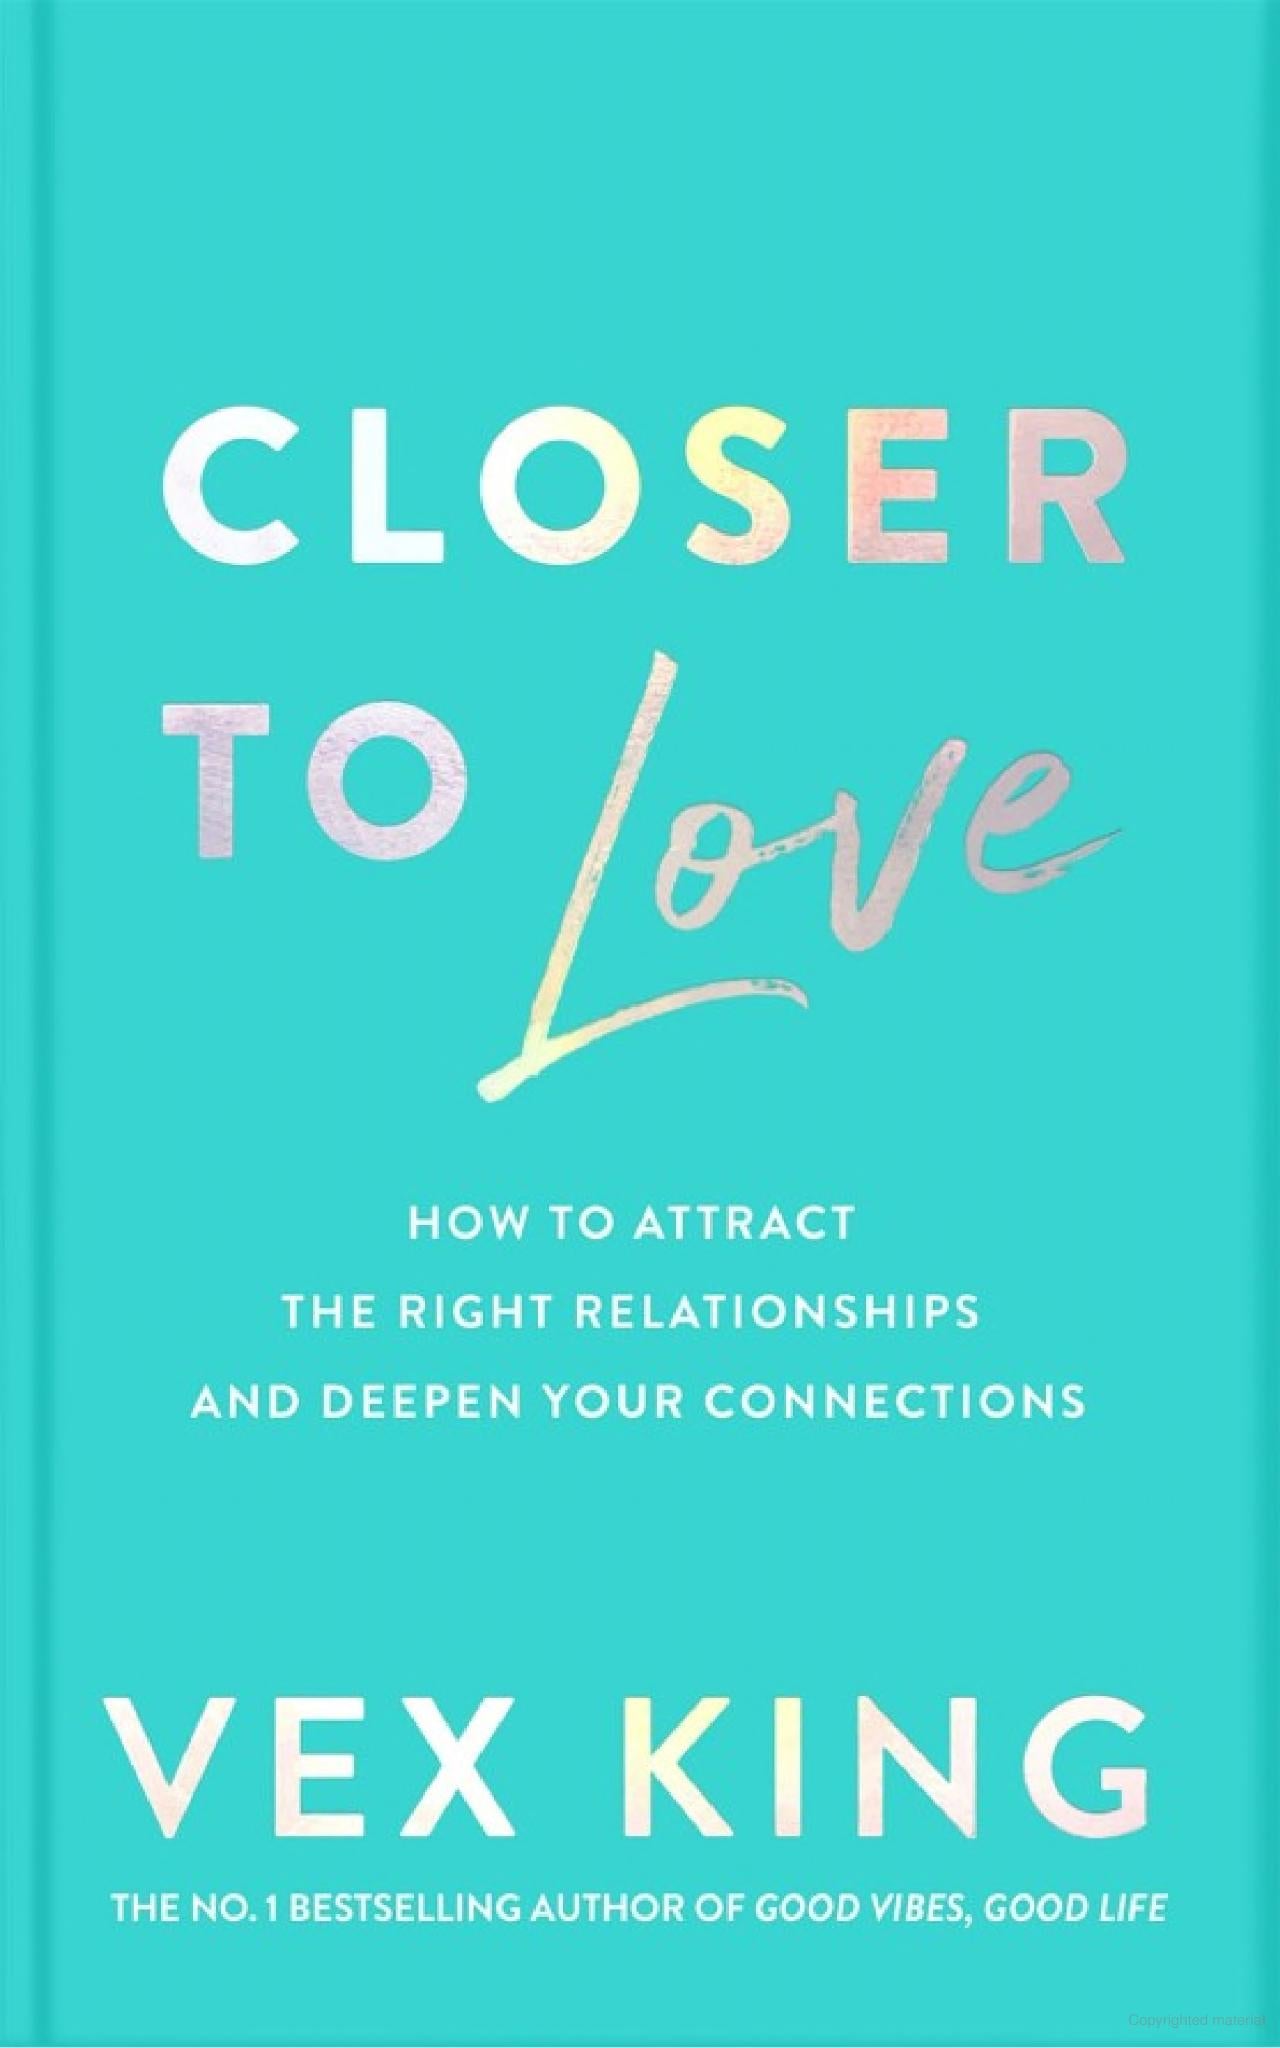 Closer to Love: How to Attract the Right Relationships and Deepen Your Connections
Book by Vex King